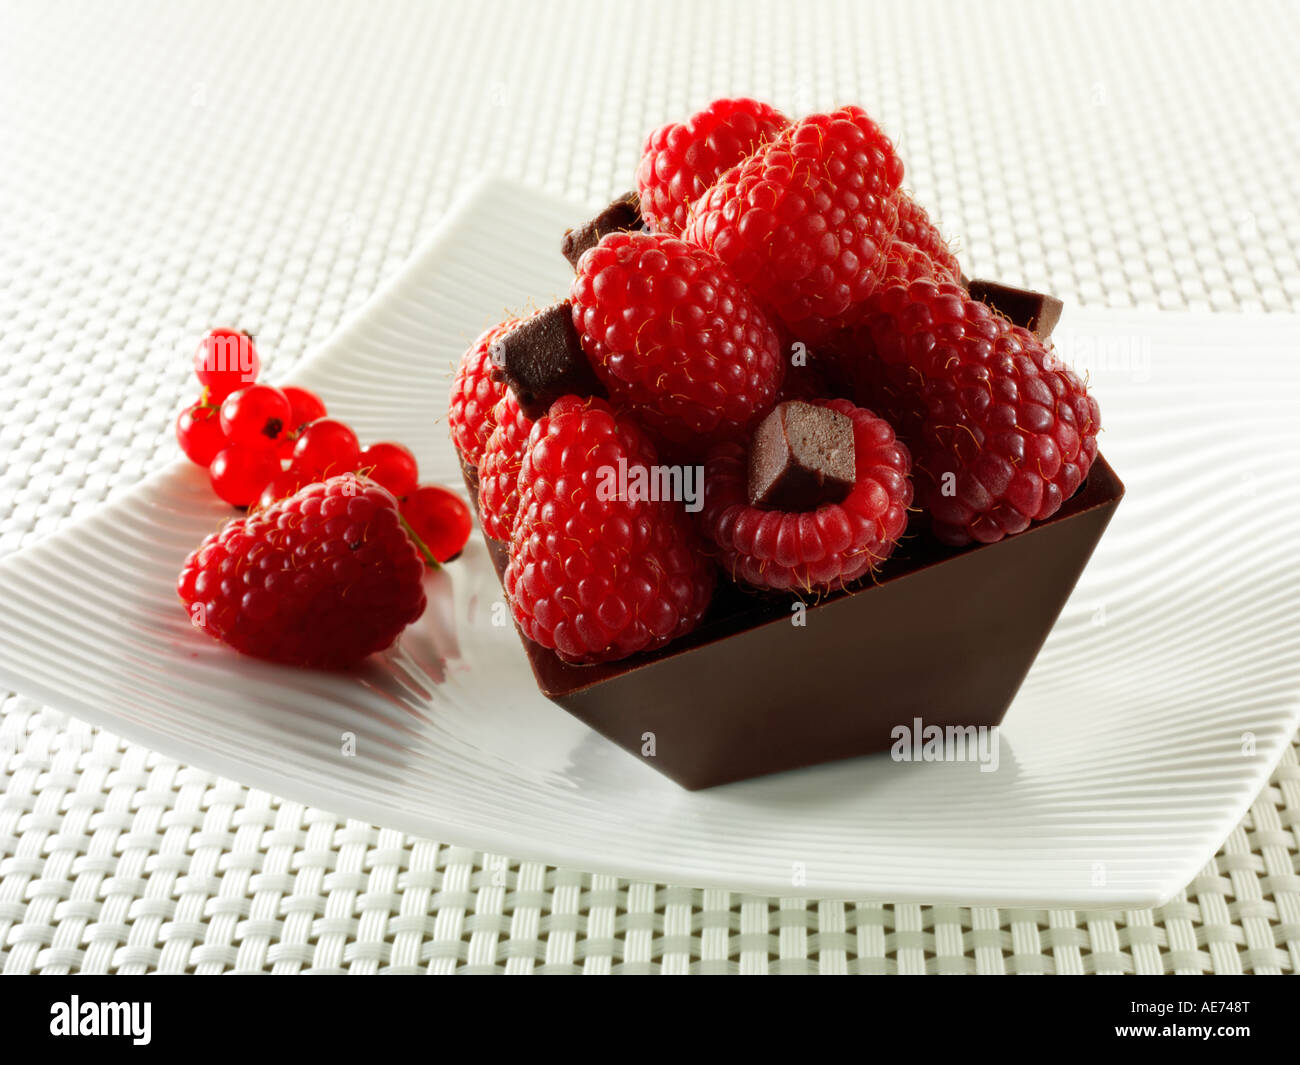 A modern square chocolate cake filled with chocolate truffle and topped with fresh raspberries on a plate Stock Photo